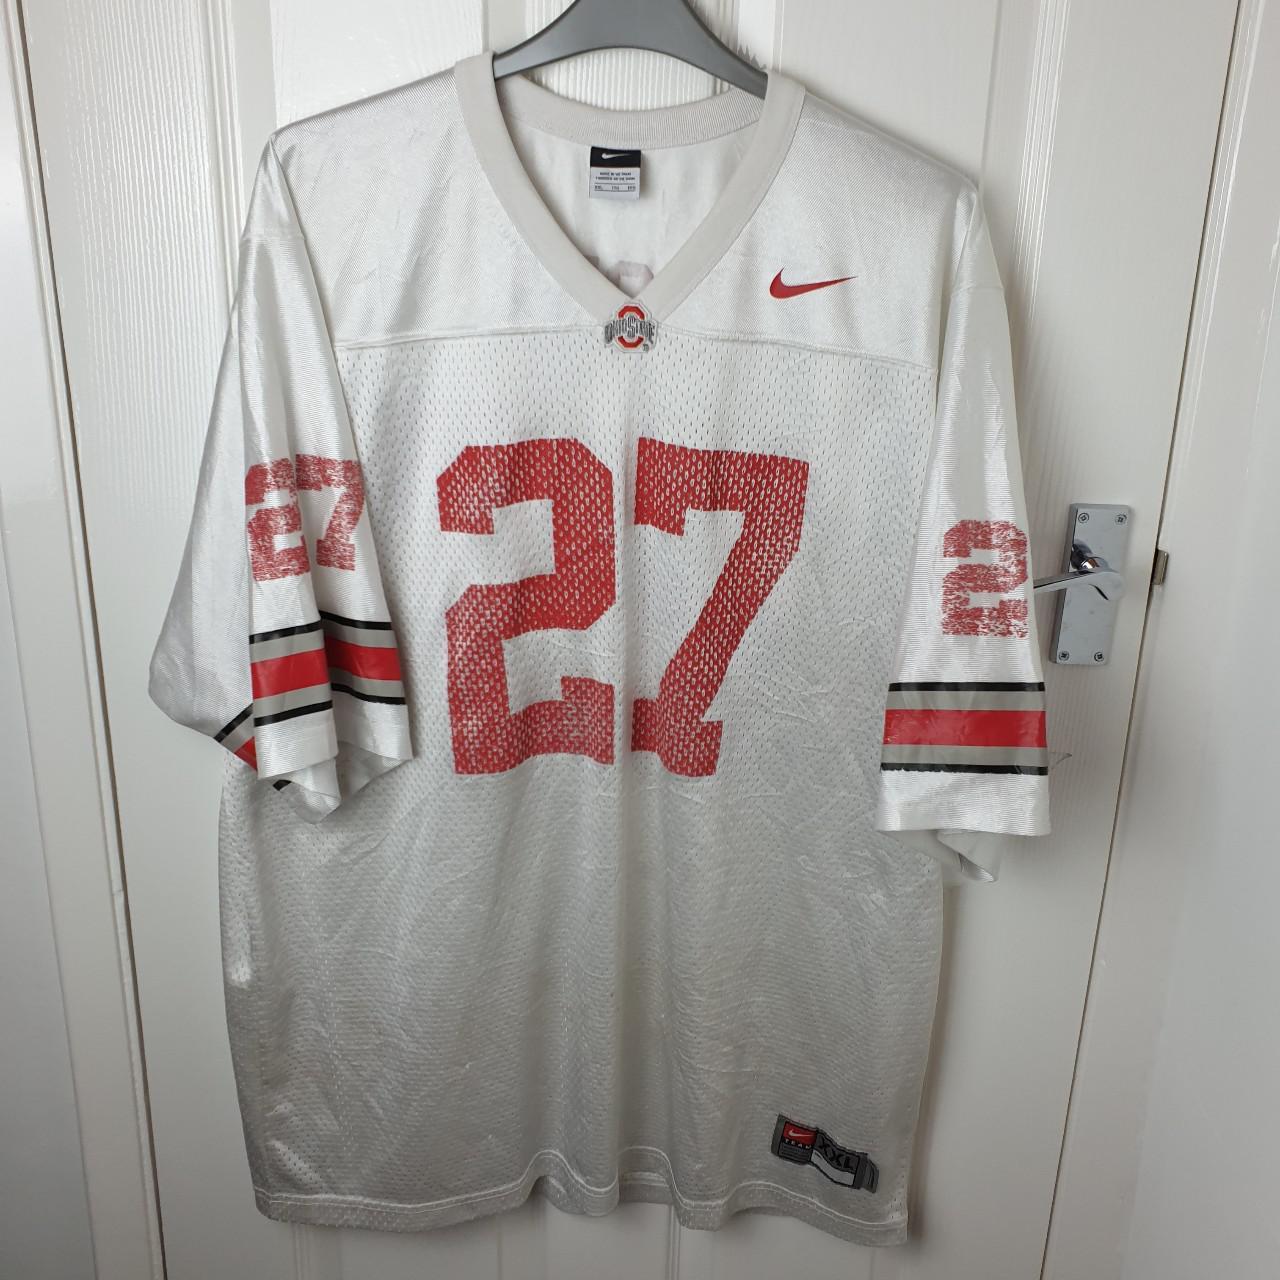 Nike Men's White and Red T-shirt